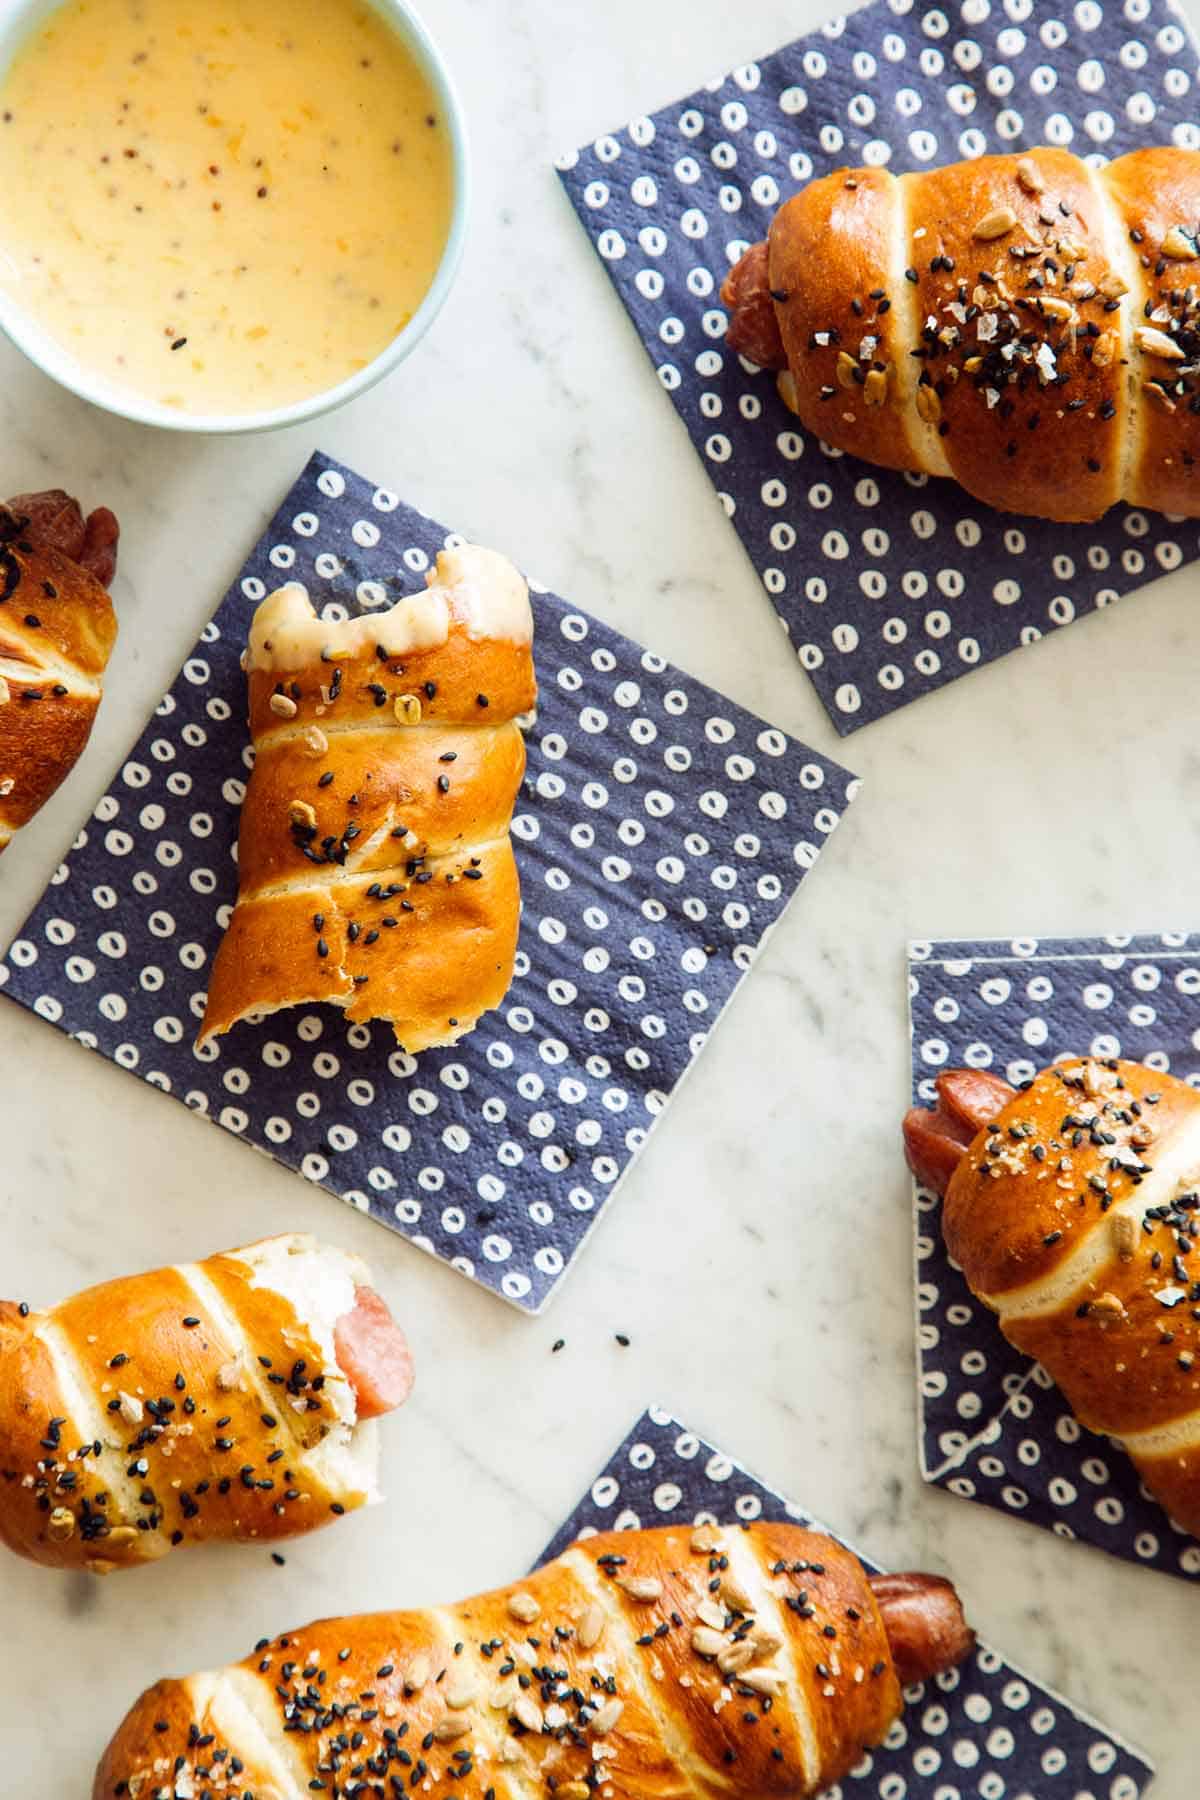 Half eaten pretzel dogs with a side of cheese sauce on blue napkins.